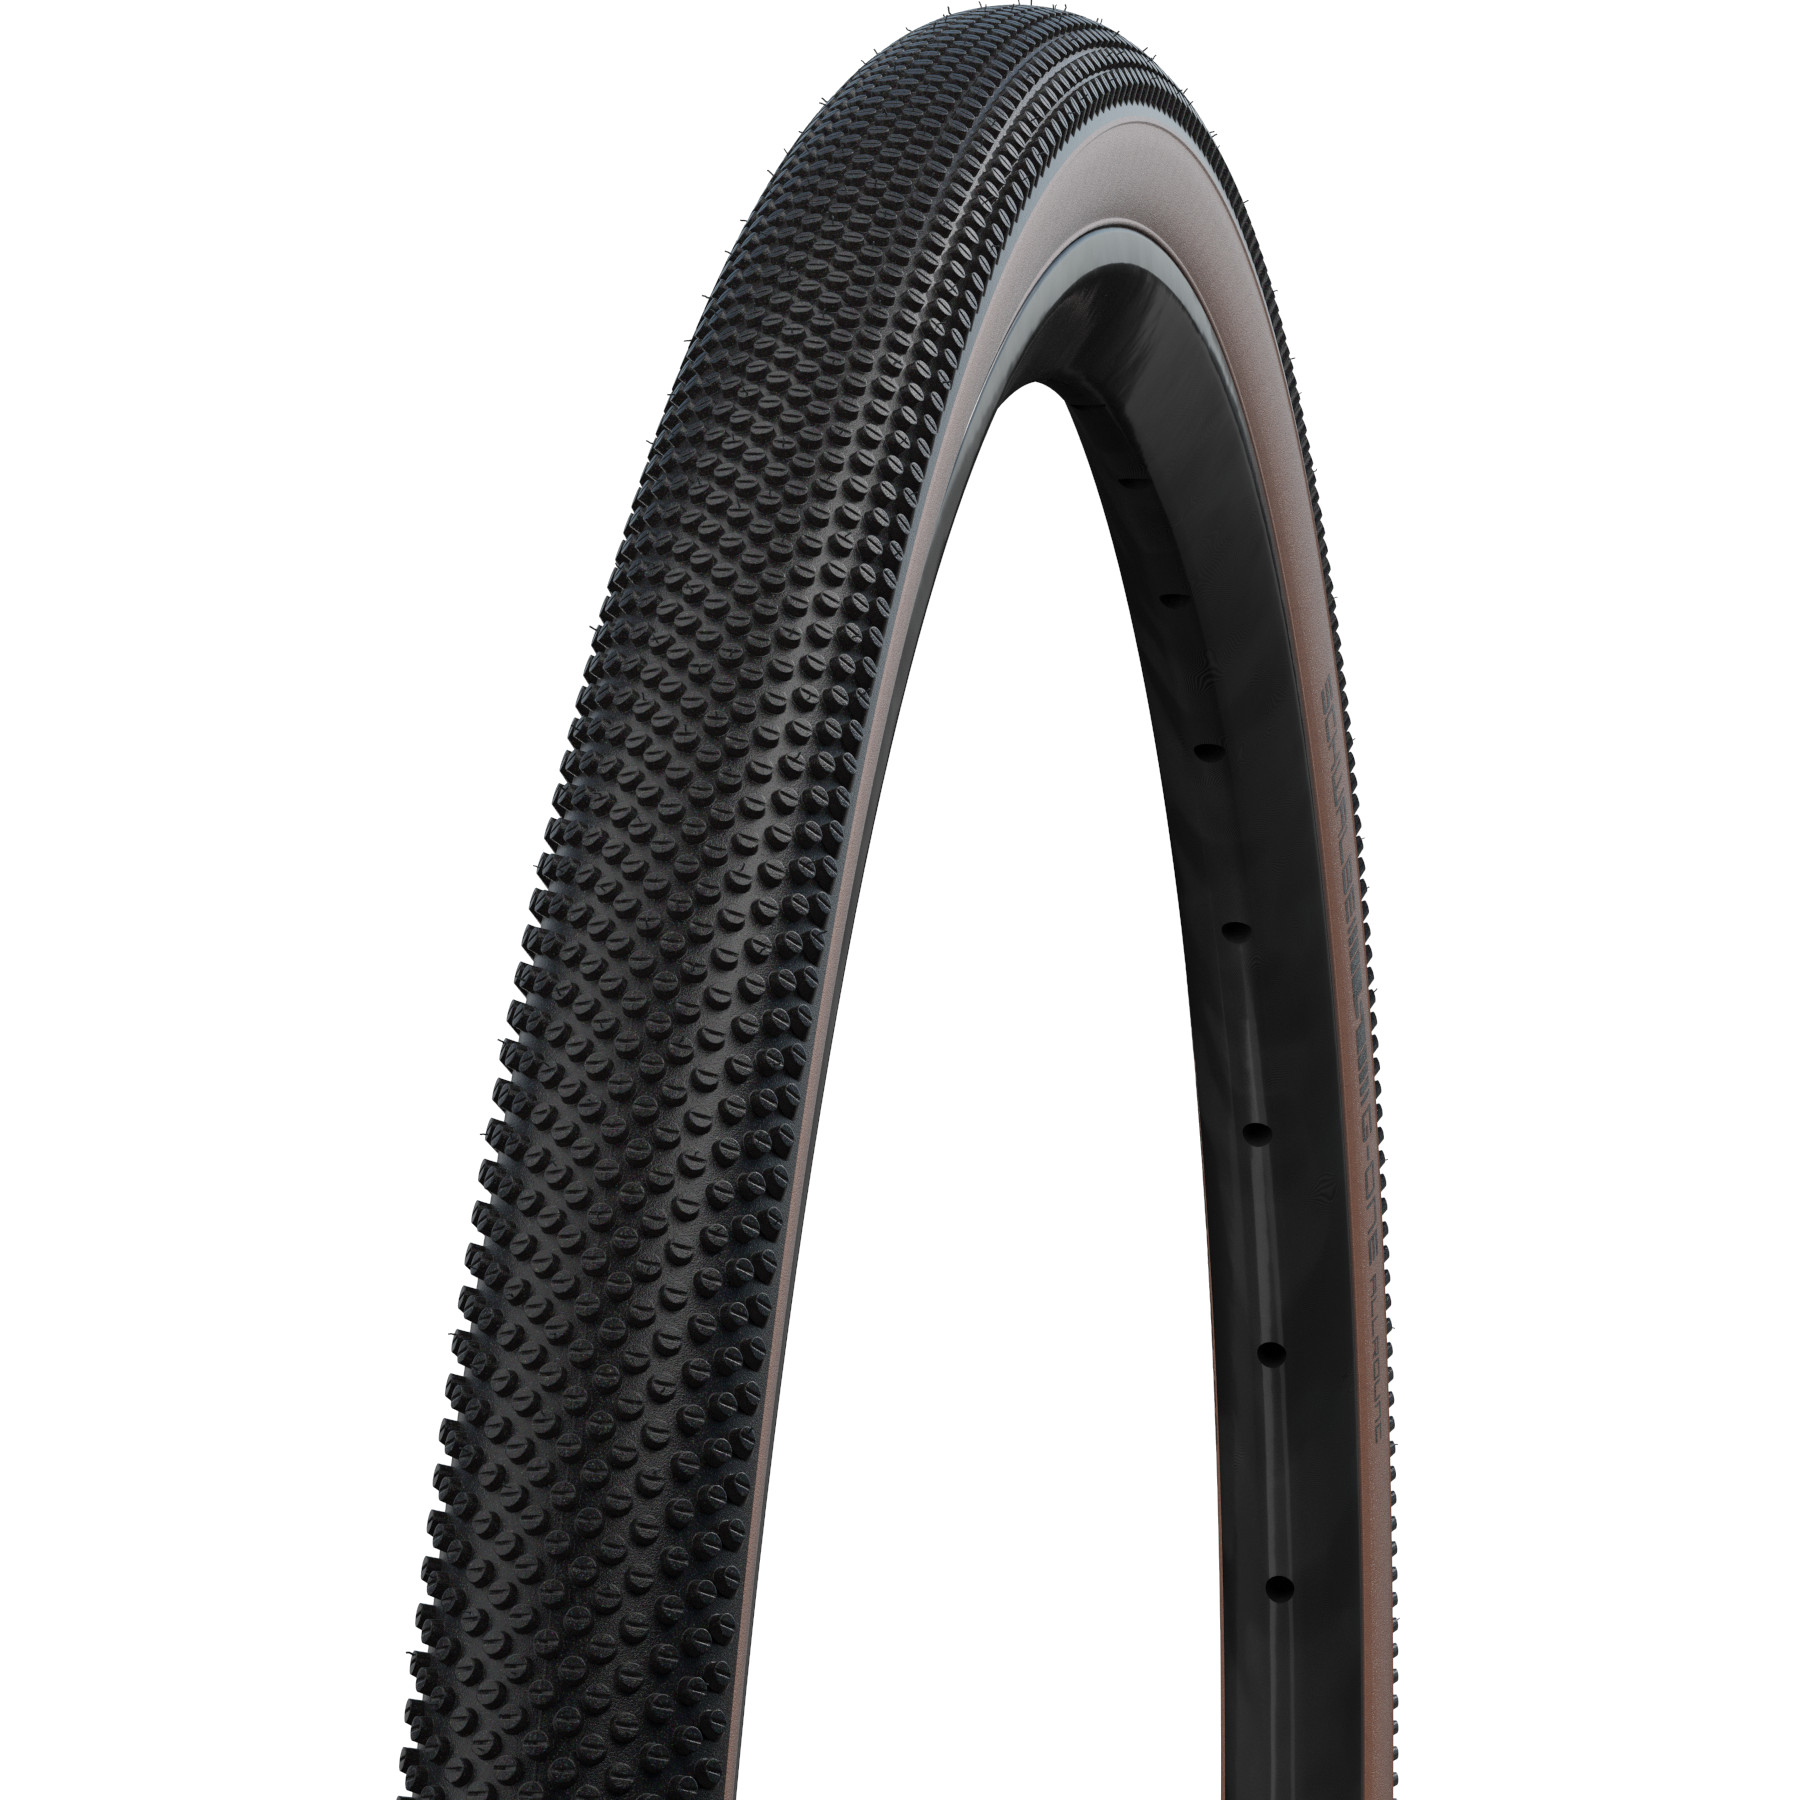 Picture of Schwalbe G-ONE Allround Folding Tire - Gravel | Performance | Addix | Race Guard | TLEasy - E-25 - 45-622 | Bronze Sidewall